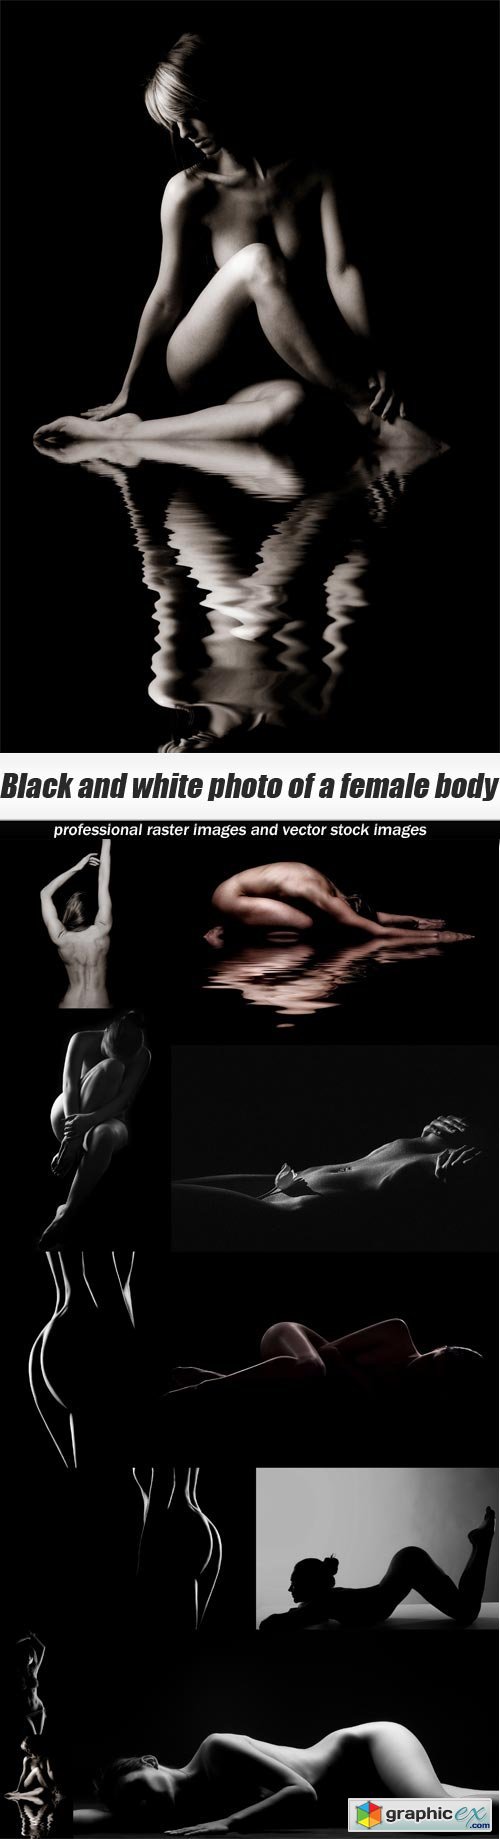 Black and white photo of a female body